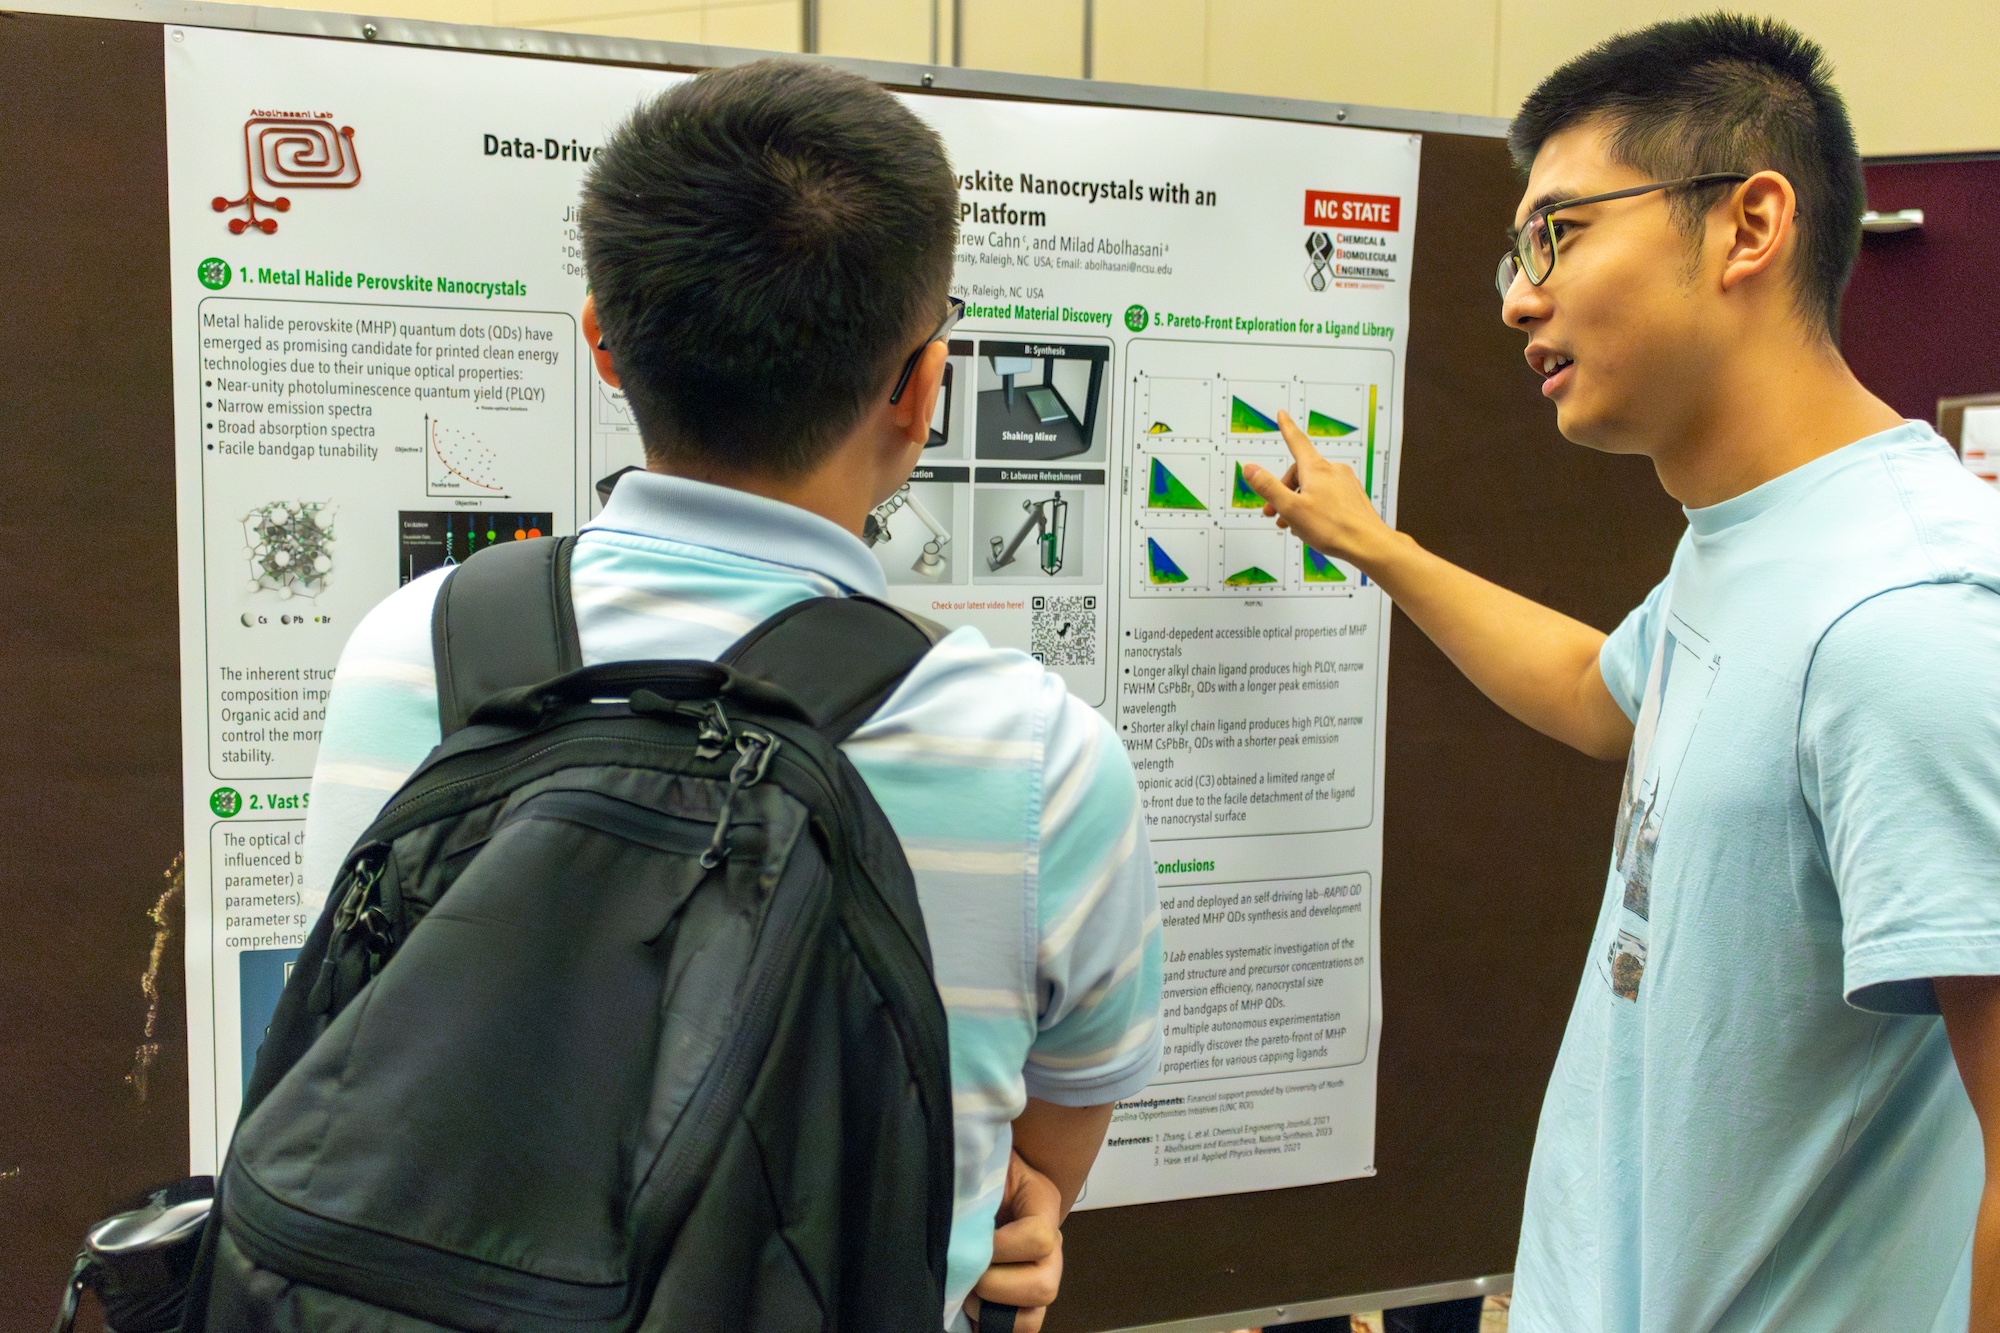 two men discuss a research poster